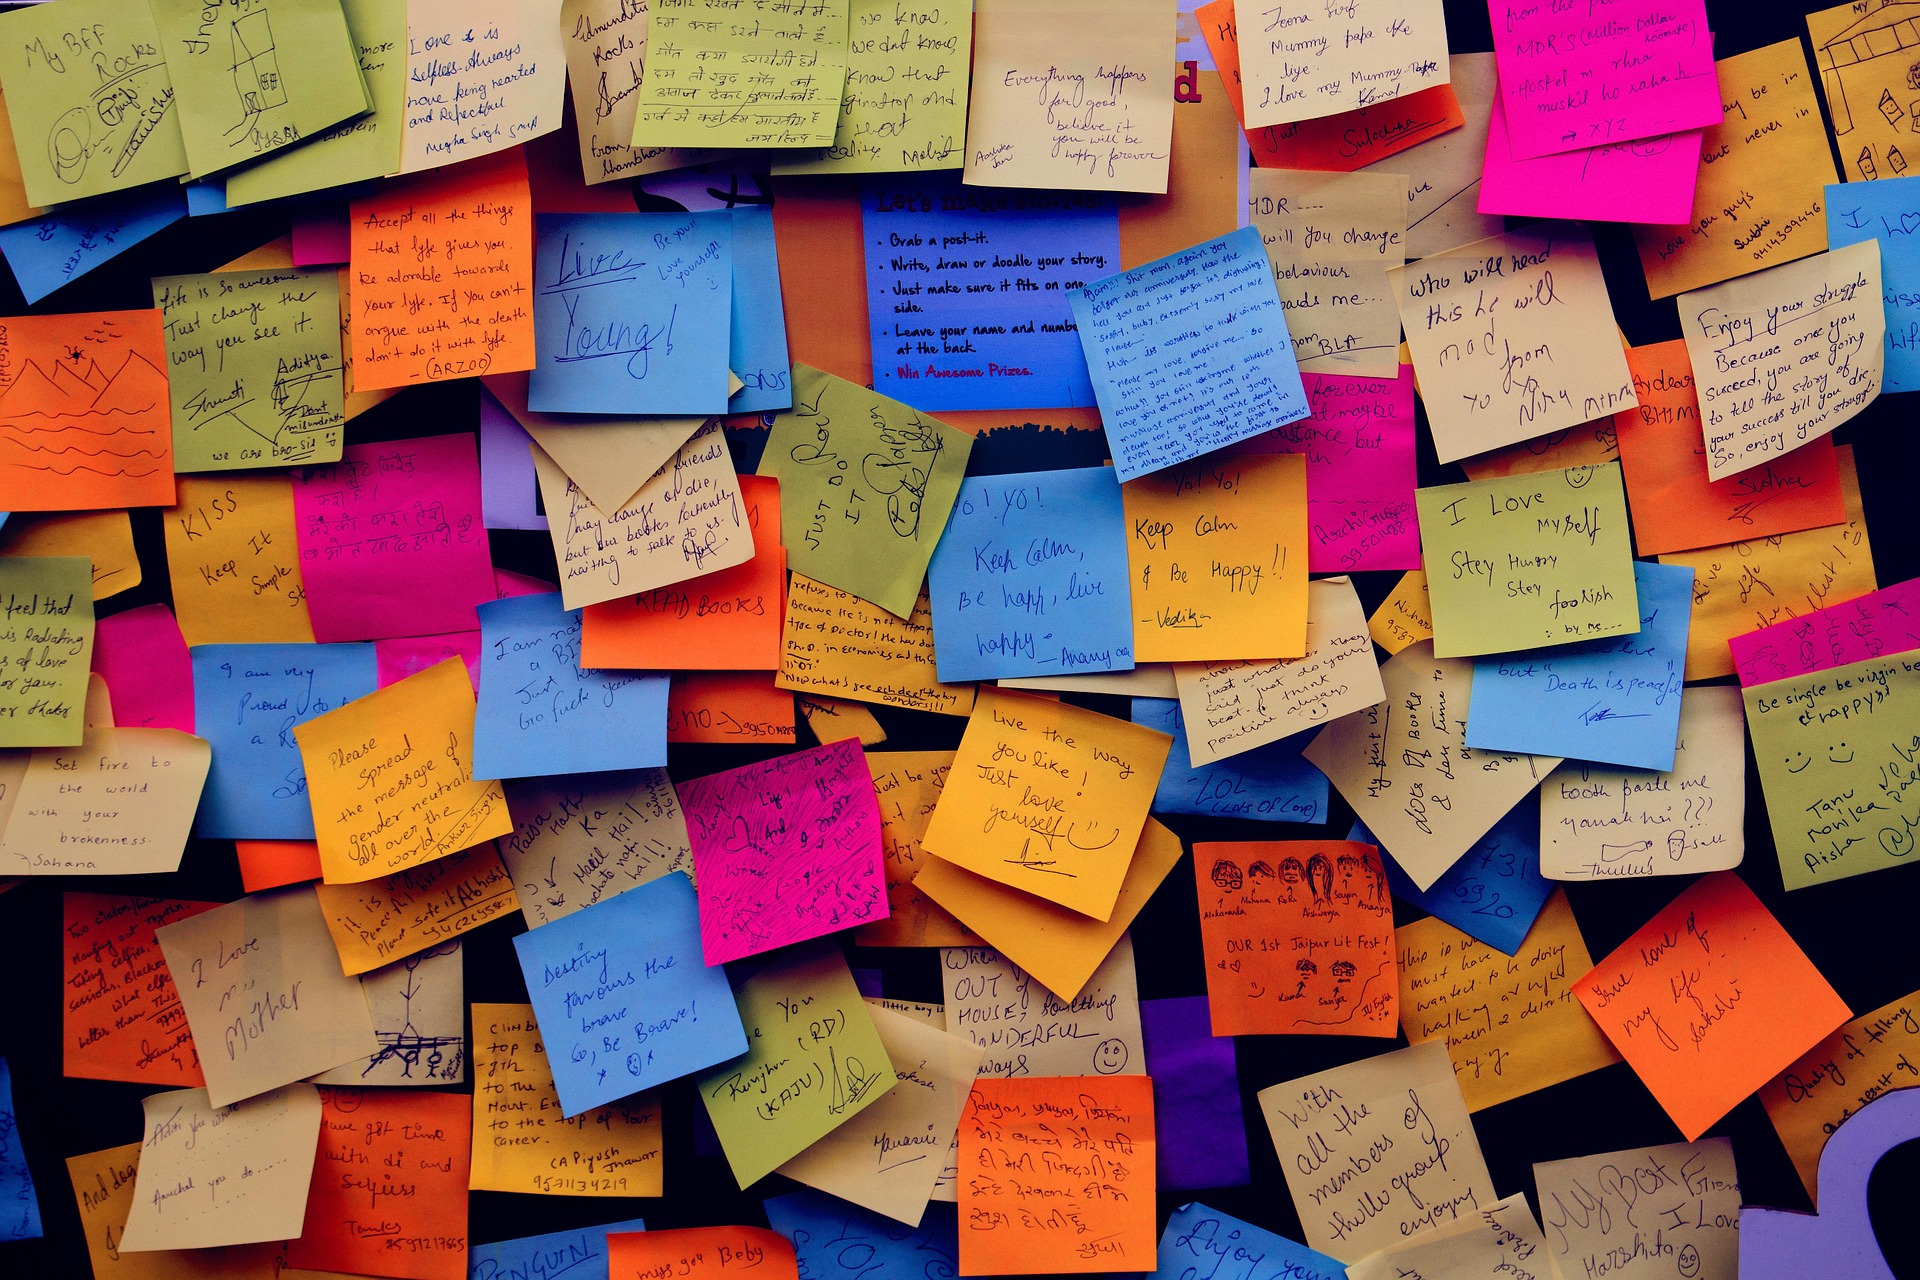 post it notes on wall of subway